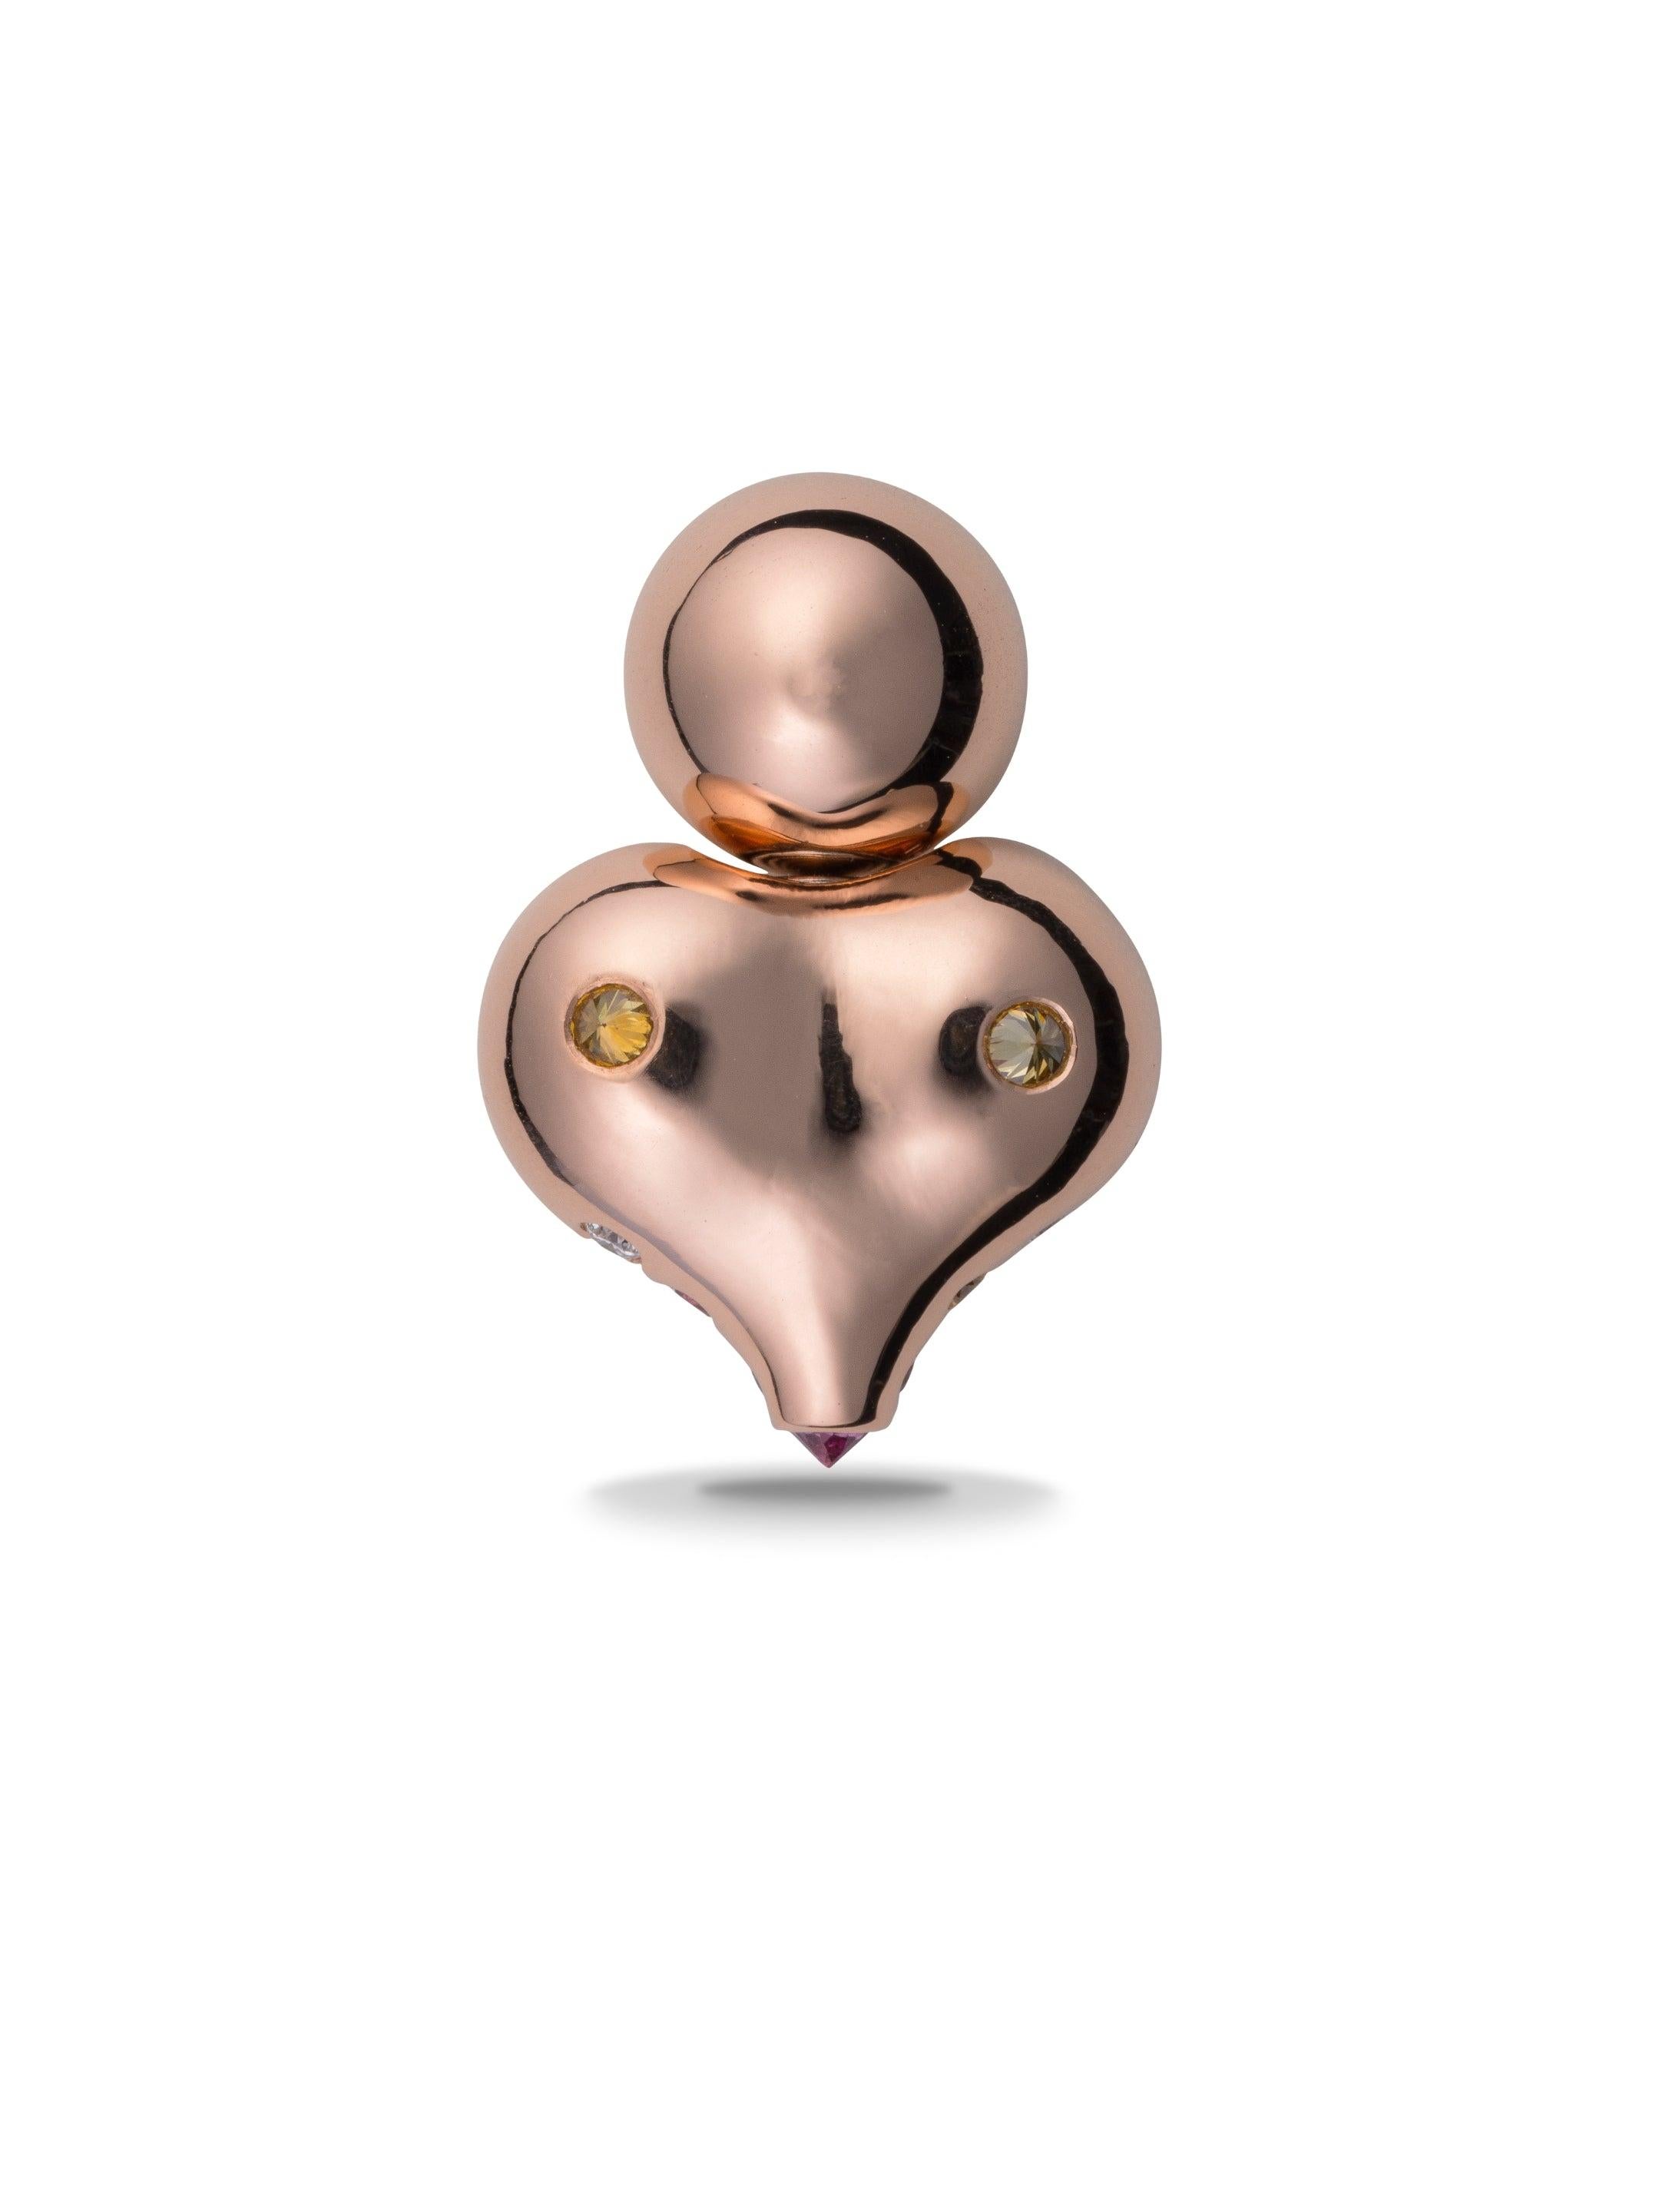 The 'Buddha Ear' is a transformable magnetic earring designed and handcrafted in Geneva, Switzerland. Sustainably made from ethical 18k rose gold, this jewellery is delicately pavé-set with natural purple garnets or sapphires*, pink sapphires, white